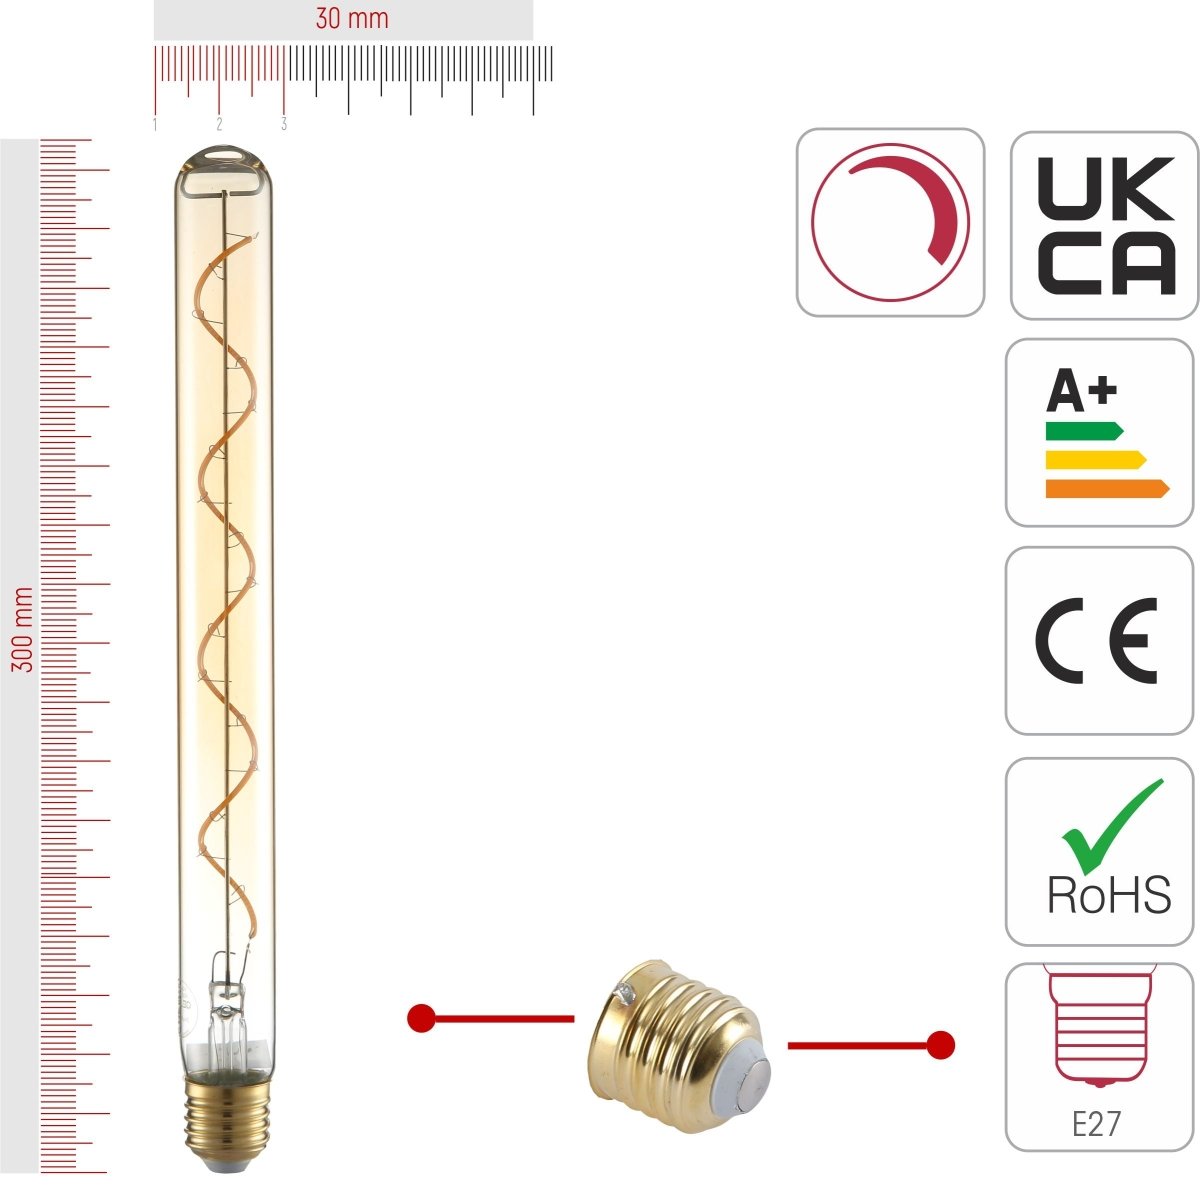 Size and certifications of LED Dimmable Filament Bulb T30 Tubular E27 Edison Screw 4W 240lm 300mm Warm White 2400K Amber Pack of 4 | TEKLED 583-150585